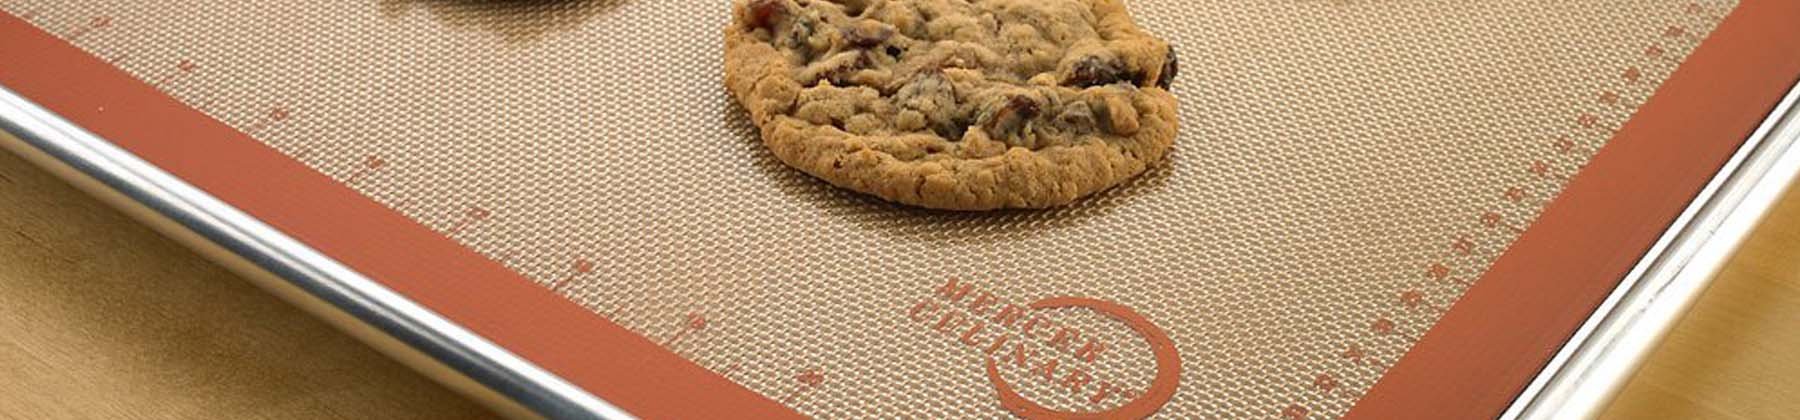 Photo of Mercer silicone baking mat with cookies.